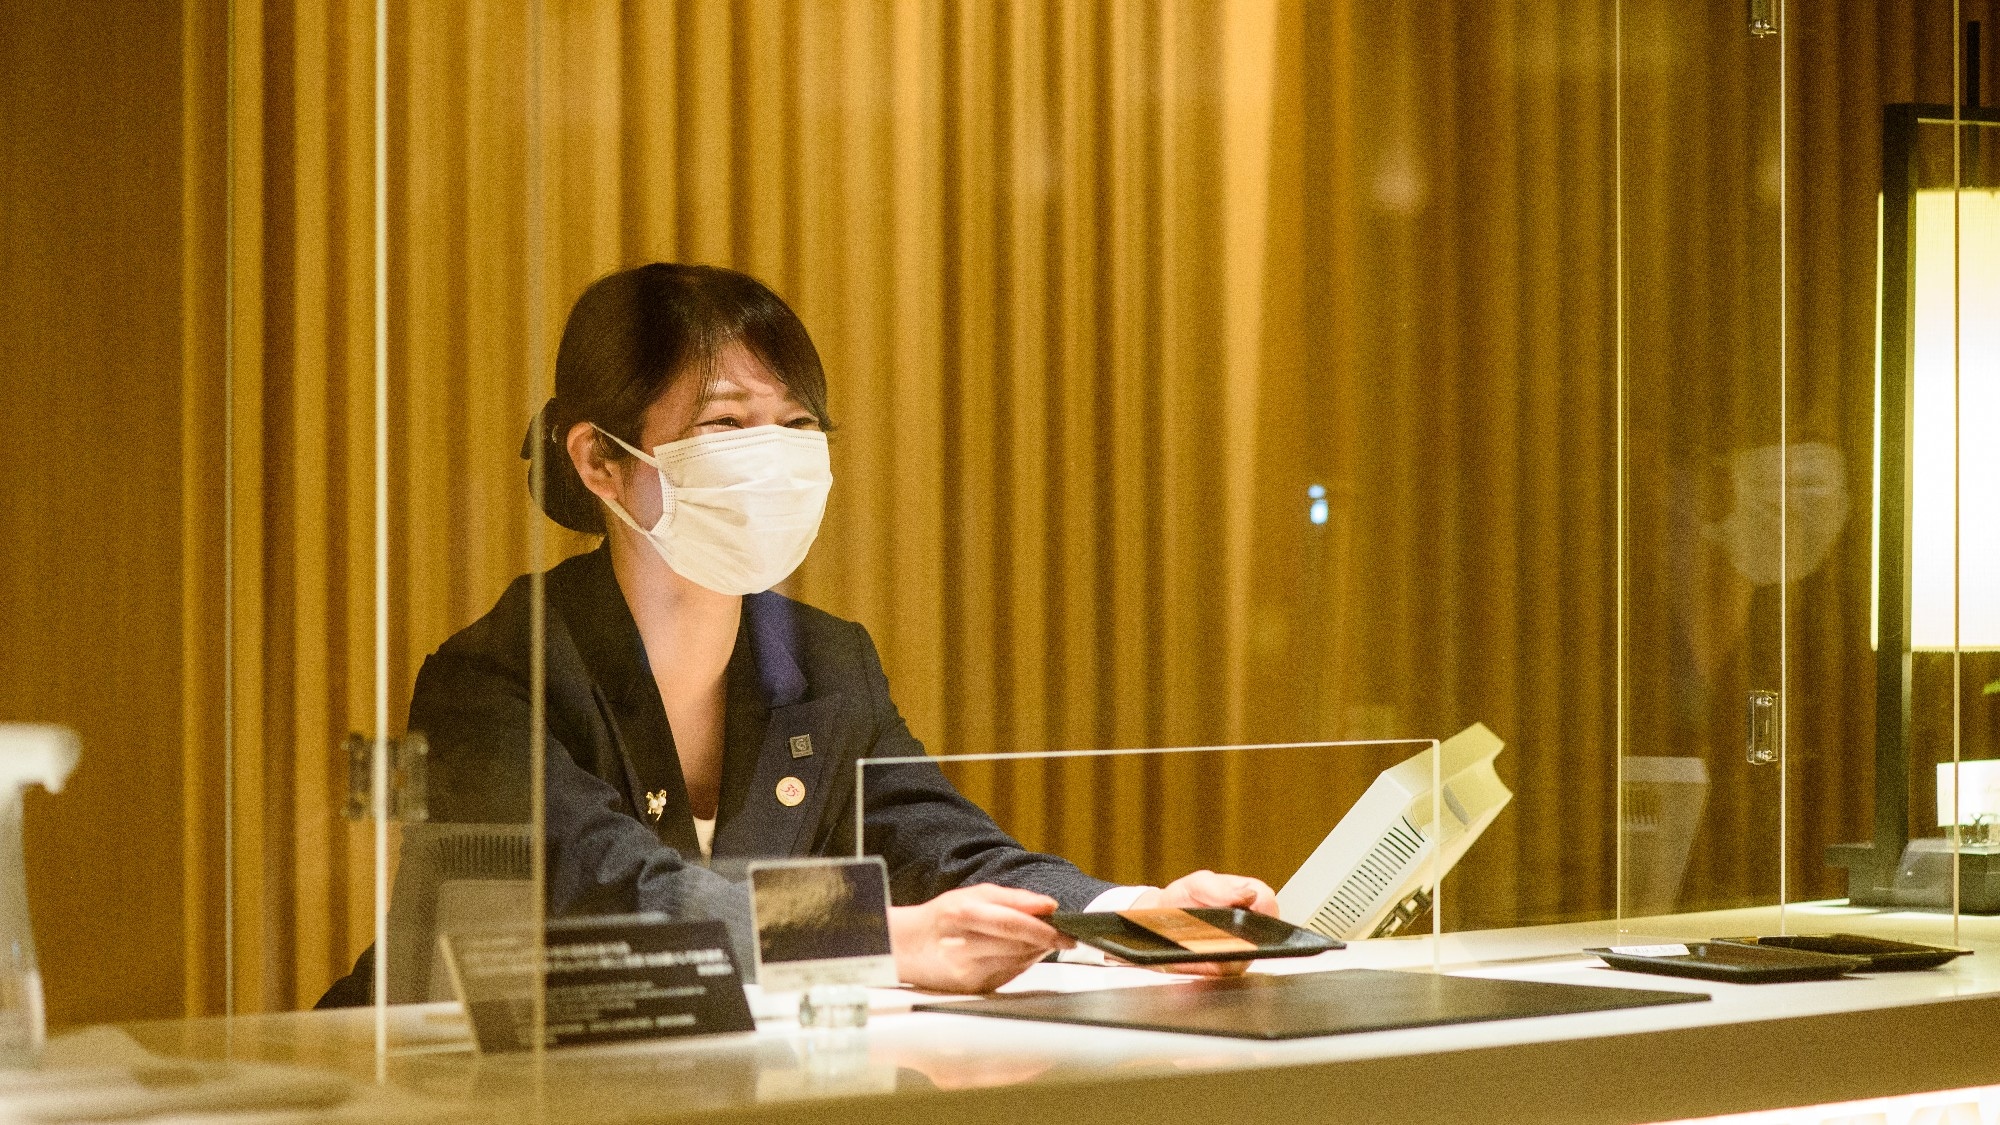 We will welcome you while taking proper measures against infectious diseases.